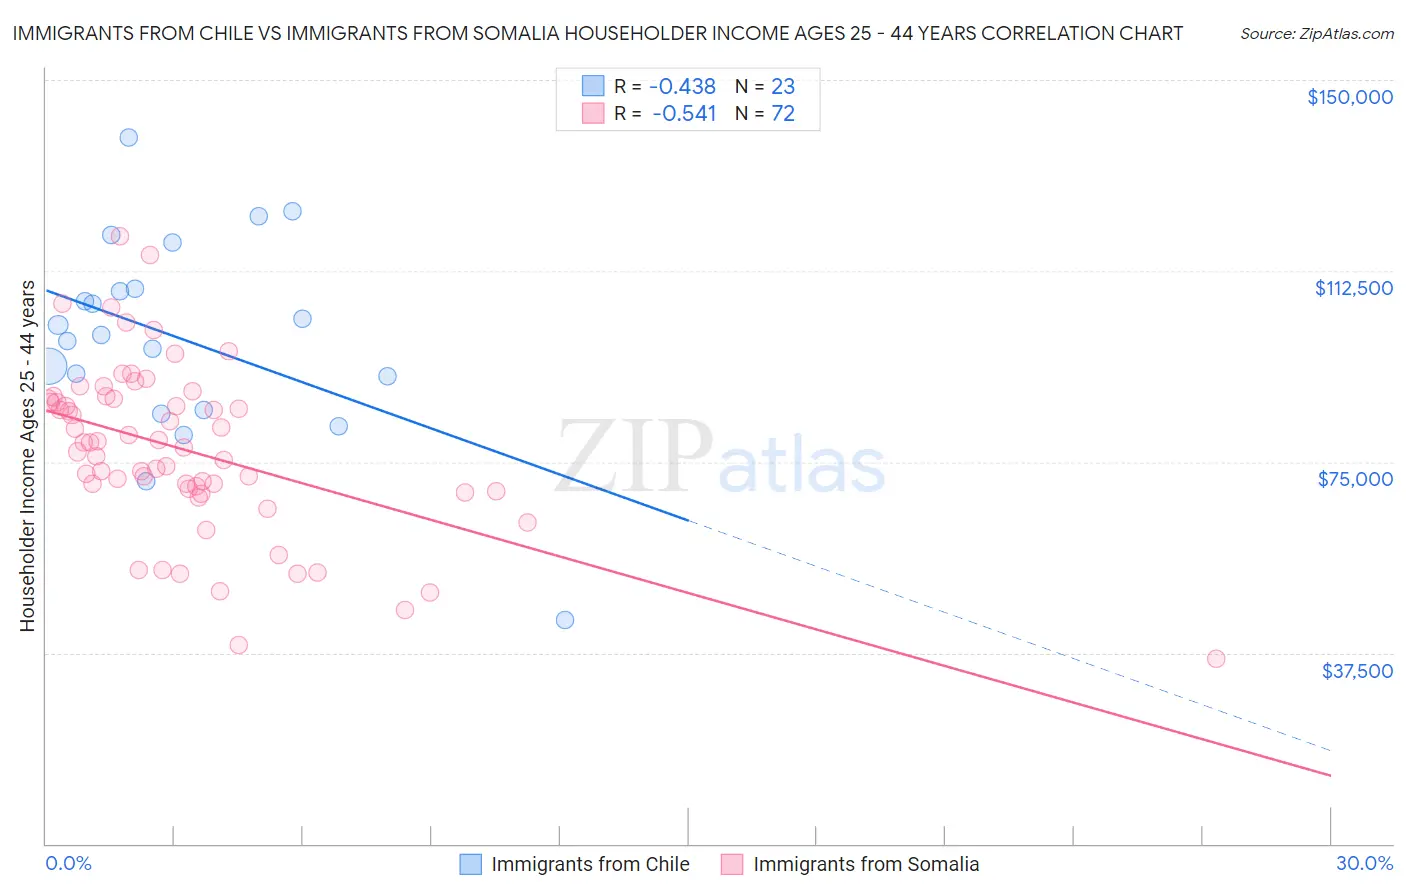 Immigrants from Chile vs Immigrants from Somalia Householder Income Ages 25 - 44 years